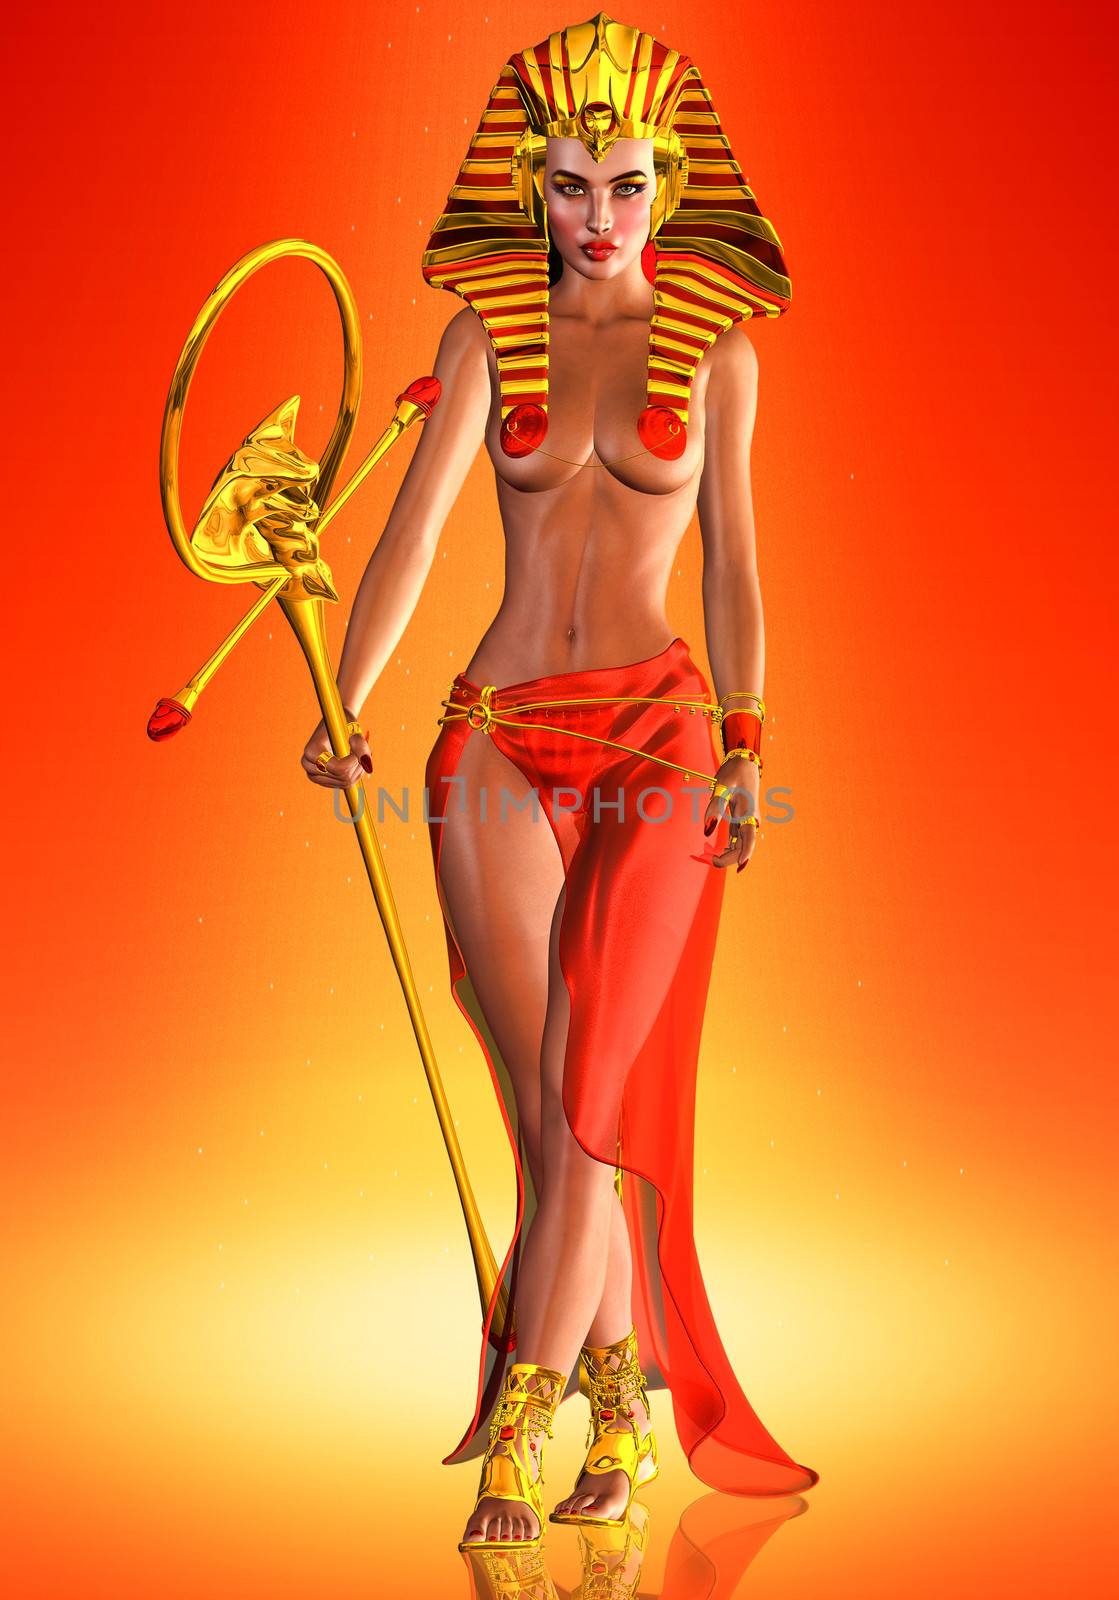 Concept art of Cleopatra, Nefertiti or Hatshepsut.  Female Egyptian Pharaoh's who stood tall and ruled with the gumption of a god.